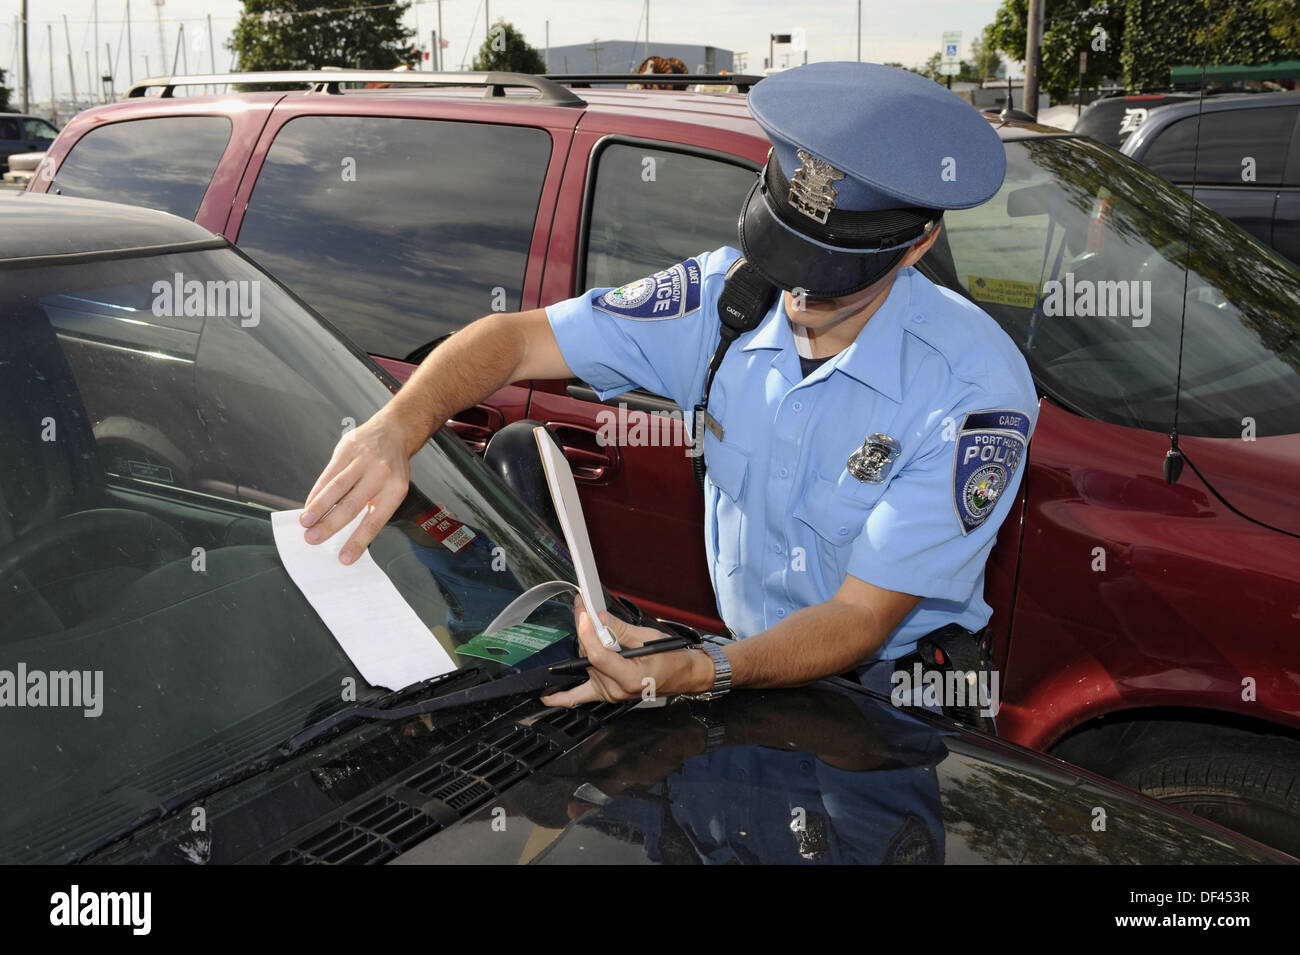 Police officer writes a ticket for parking violation Stock Photo